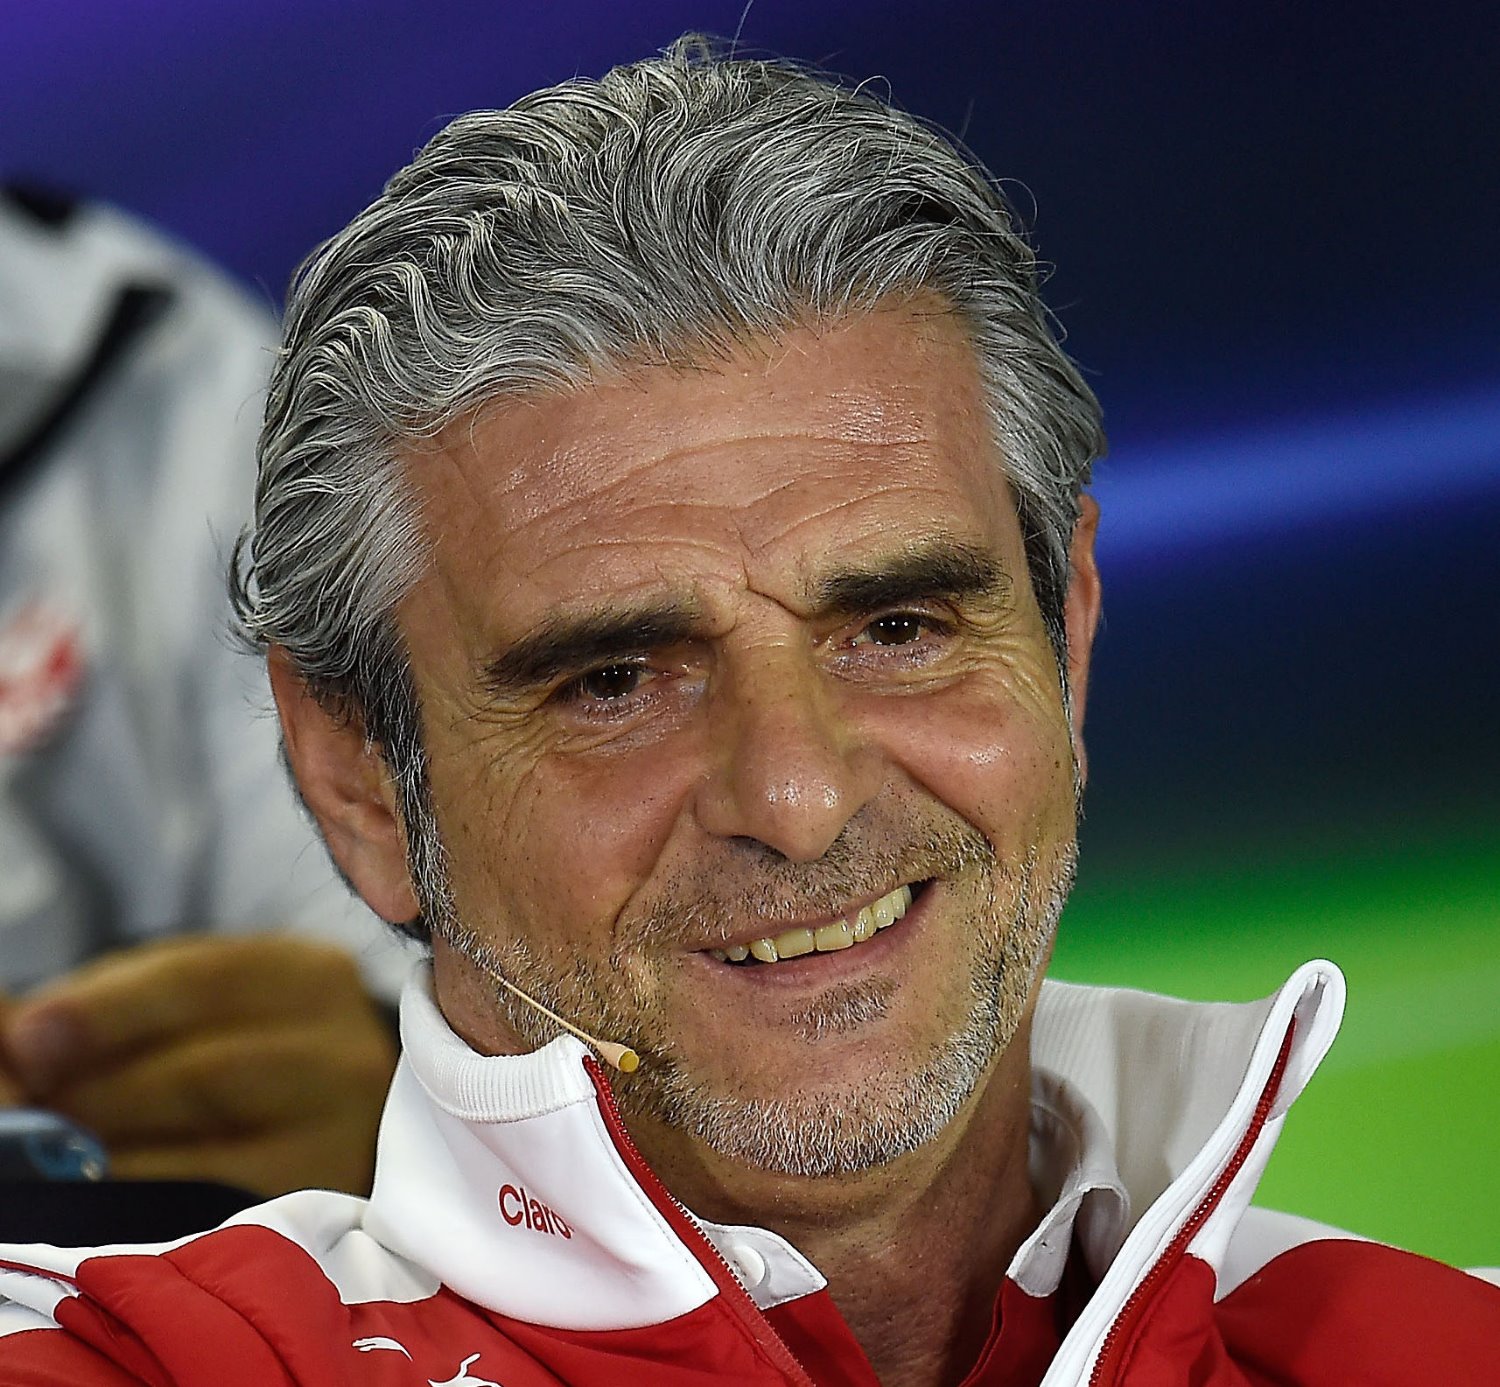 Maurizio Arrivabene under pressure after two DNFs in first two races